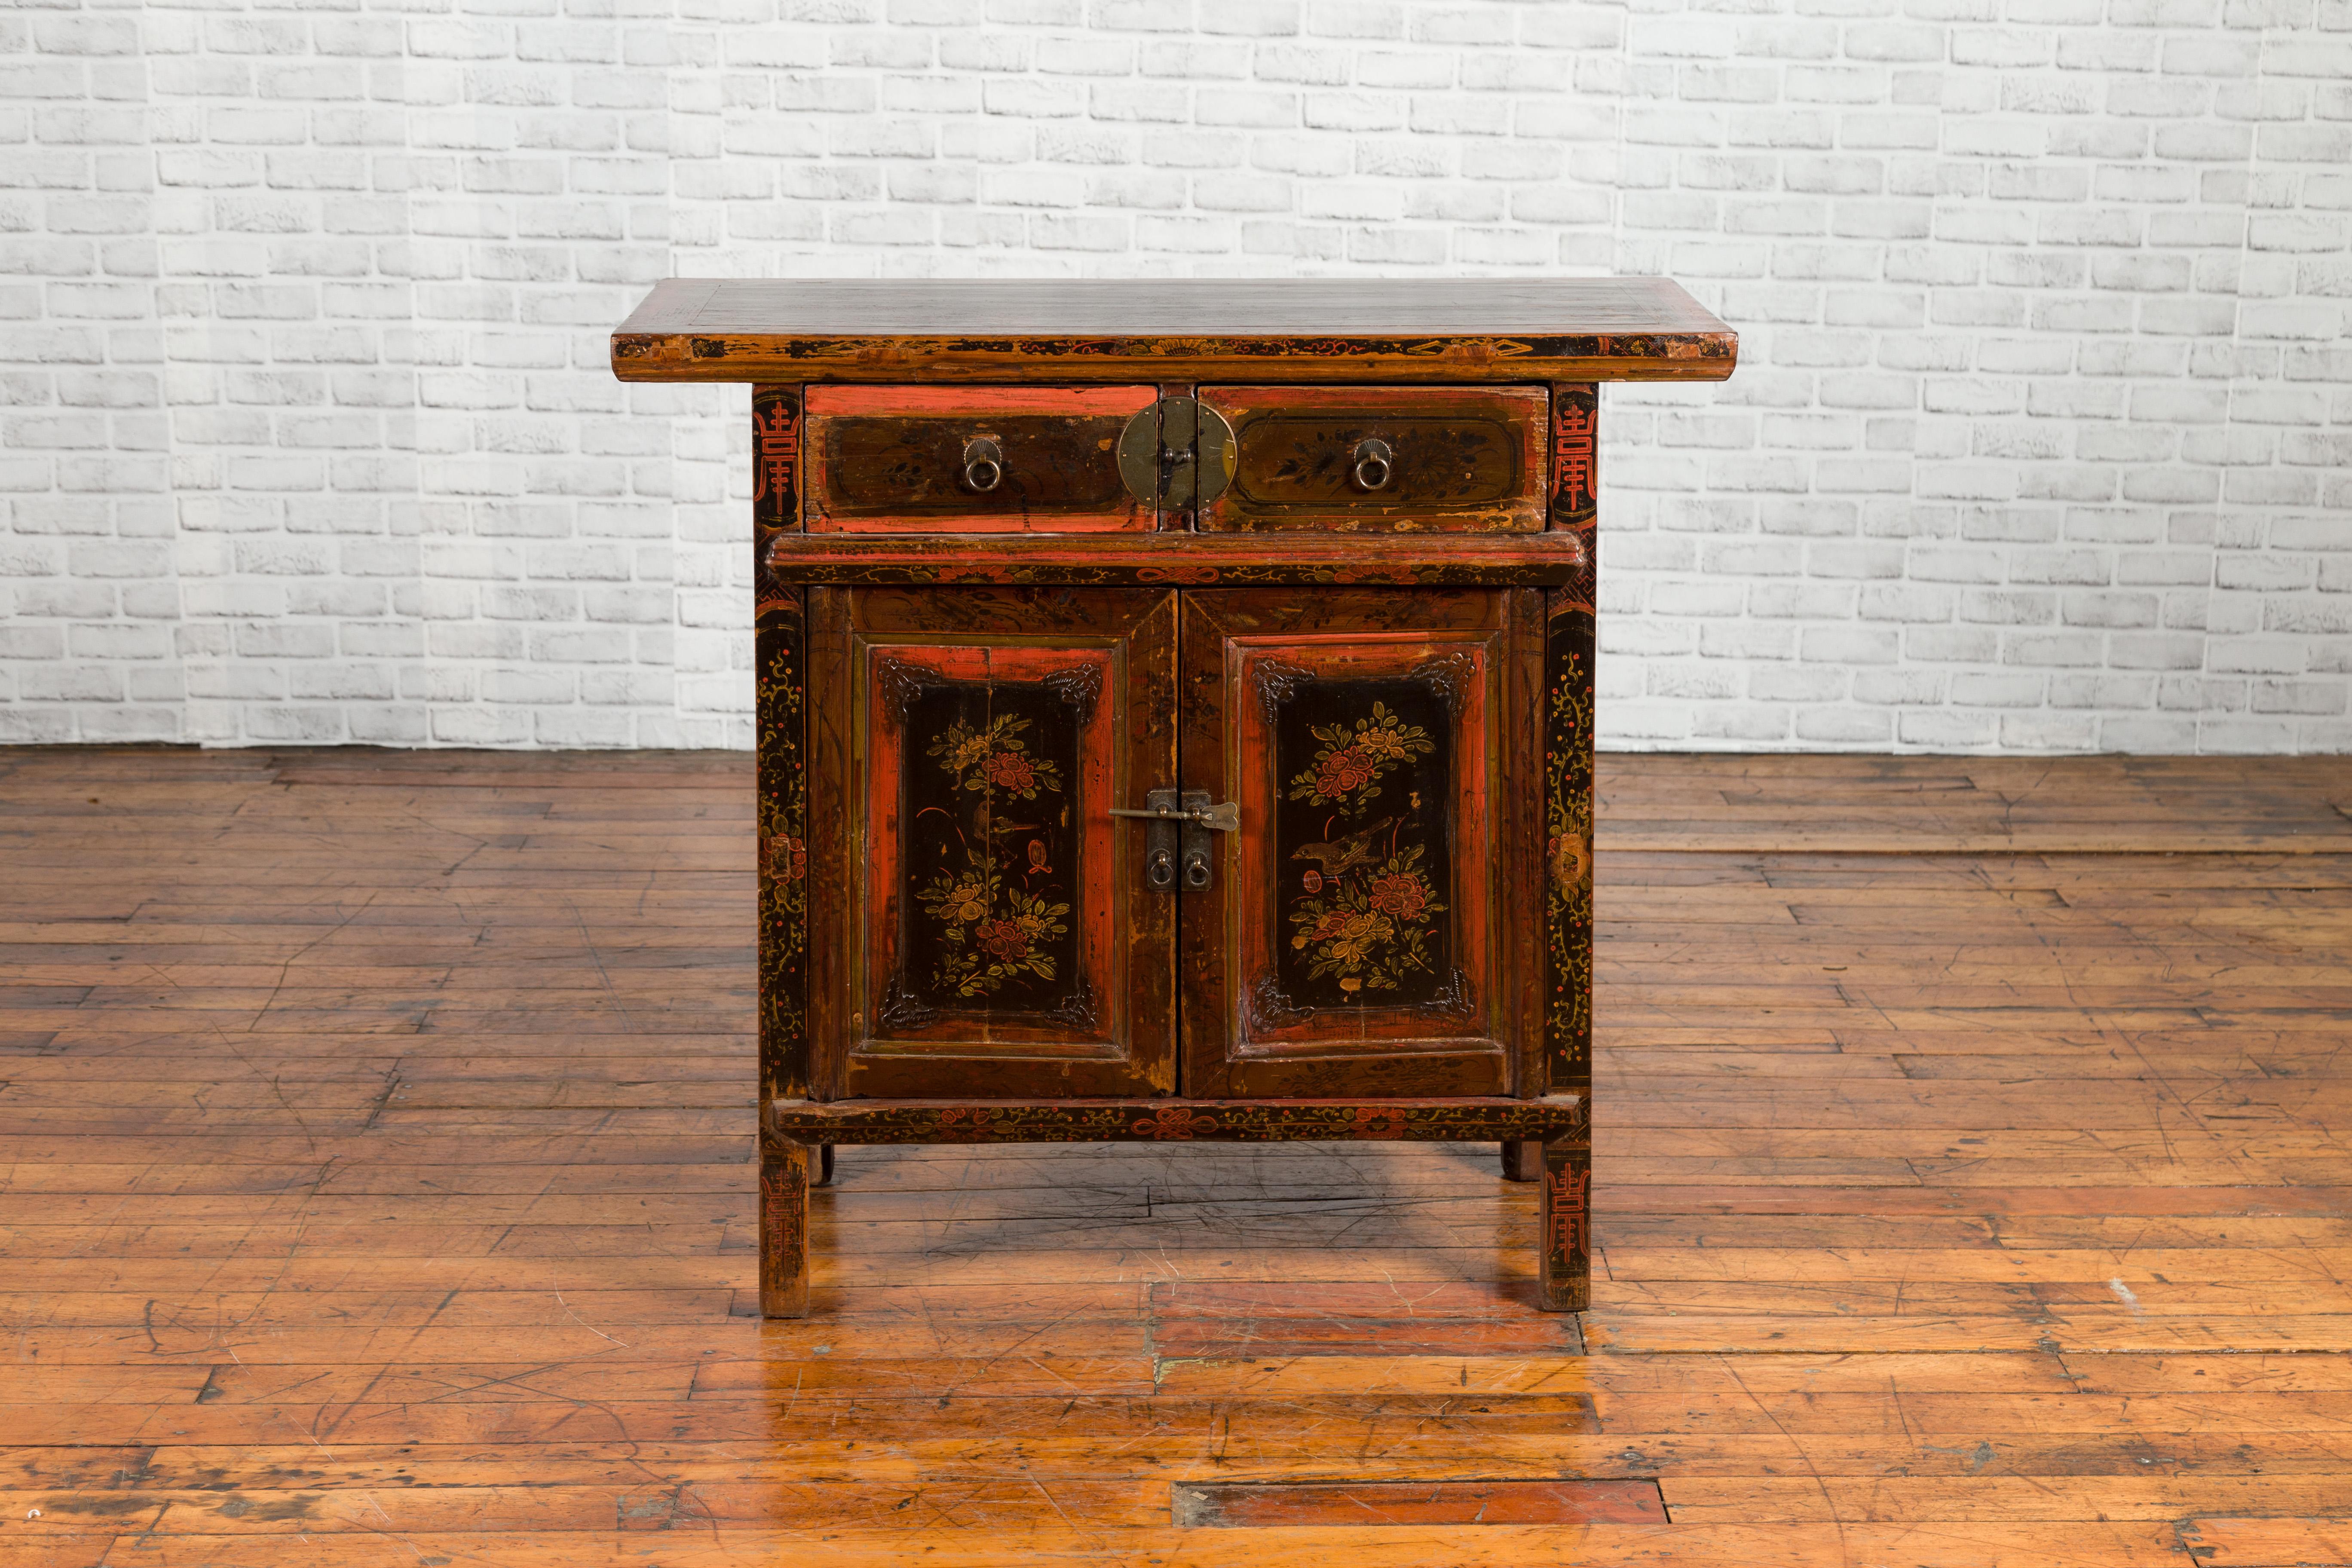 A Chinese Qing dynasty period small cabinet from the 19th century, with original brown, red and black lacquer, two drawers and two doors. Created in China during the Qing dynasty, this small cabinet features a rectangular top with nicely distressed